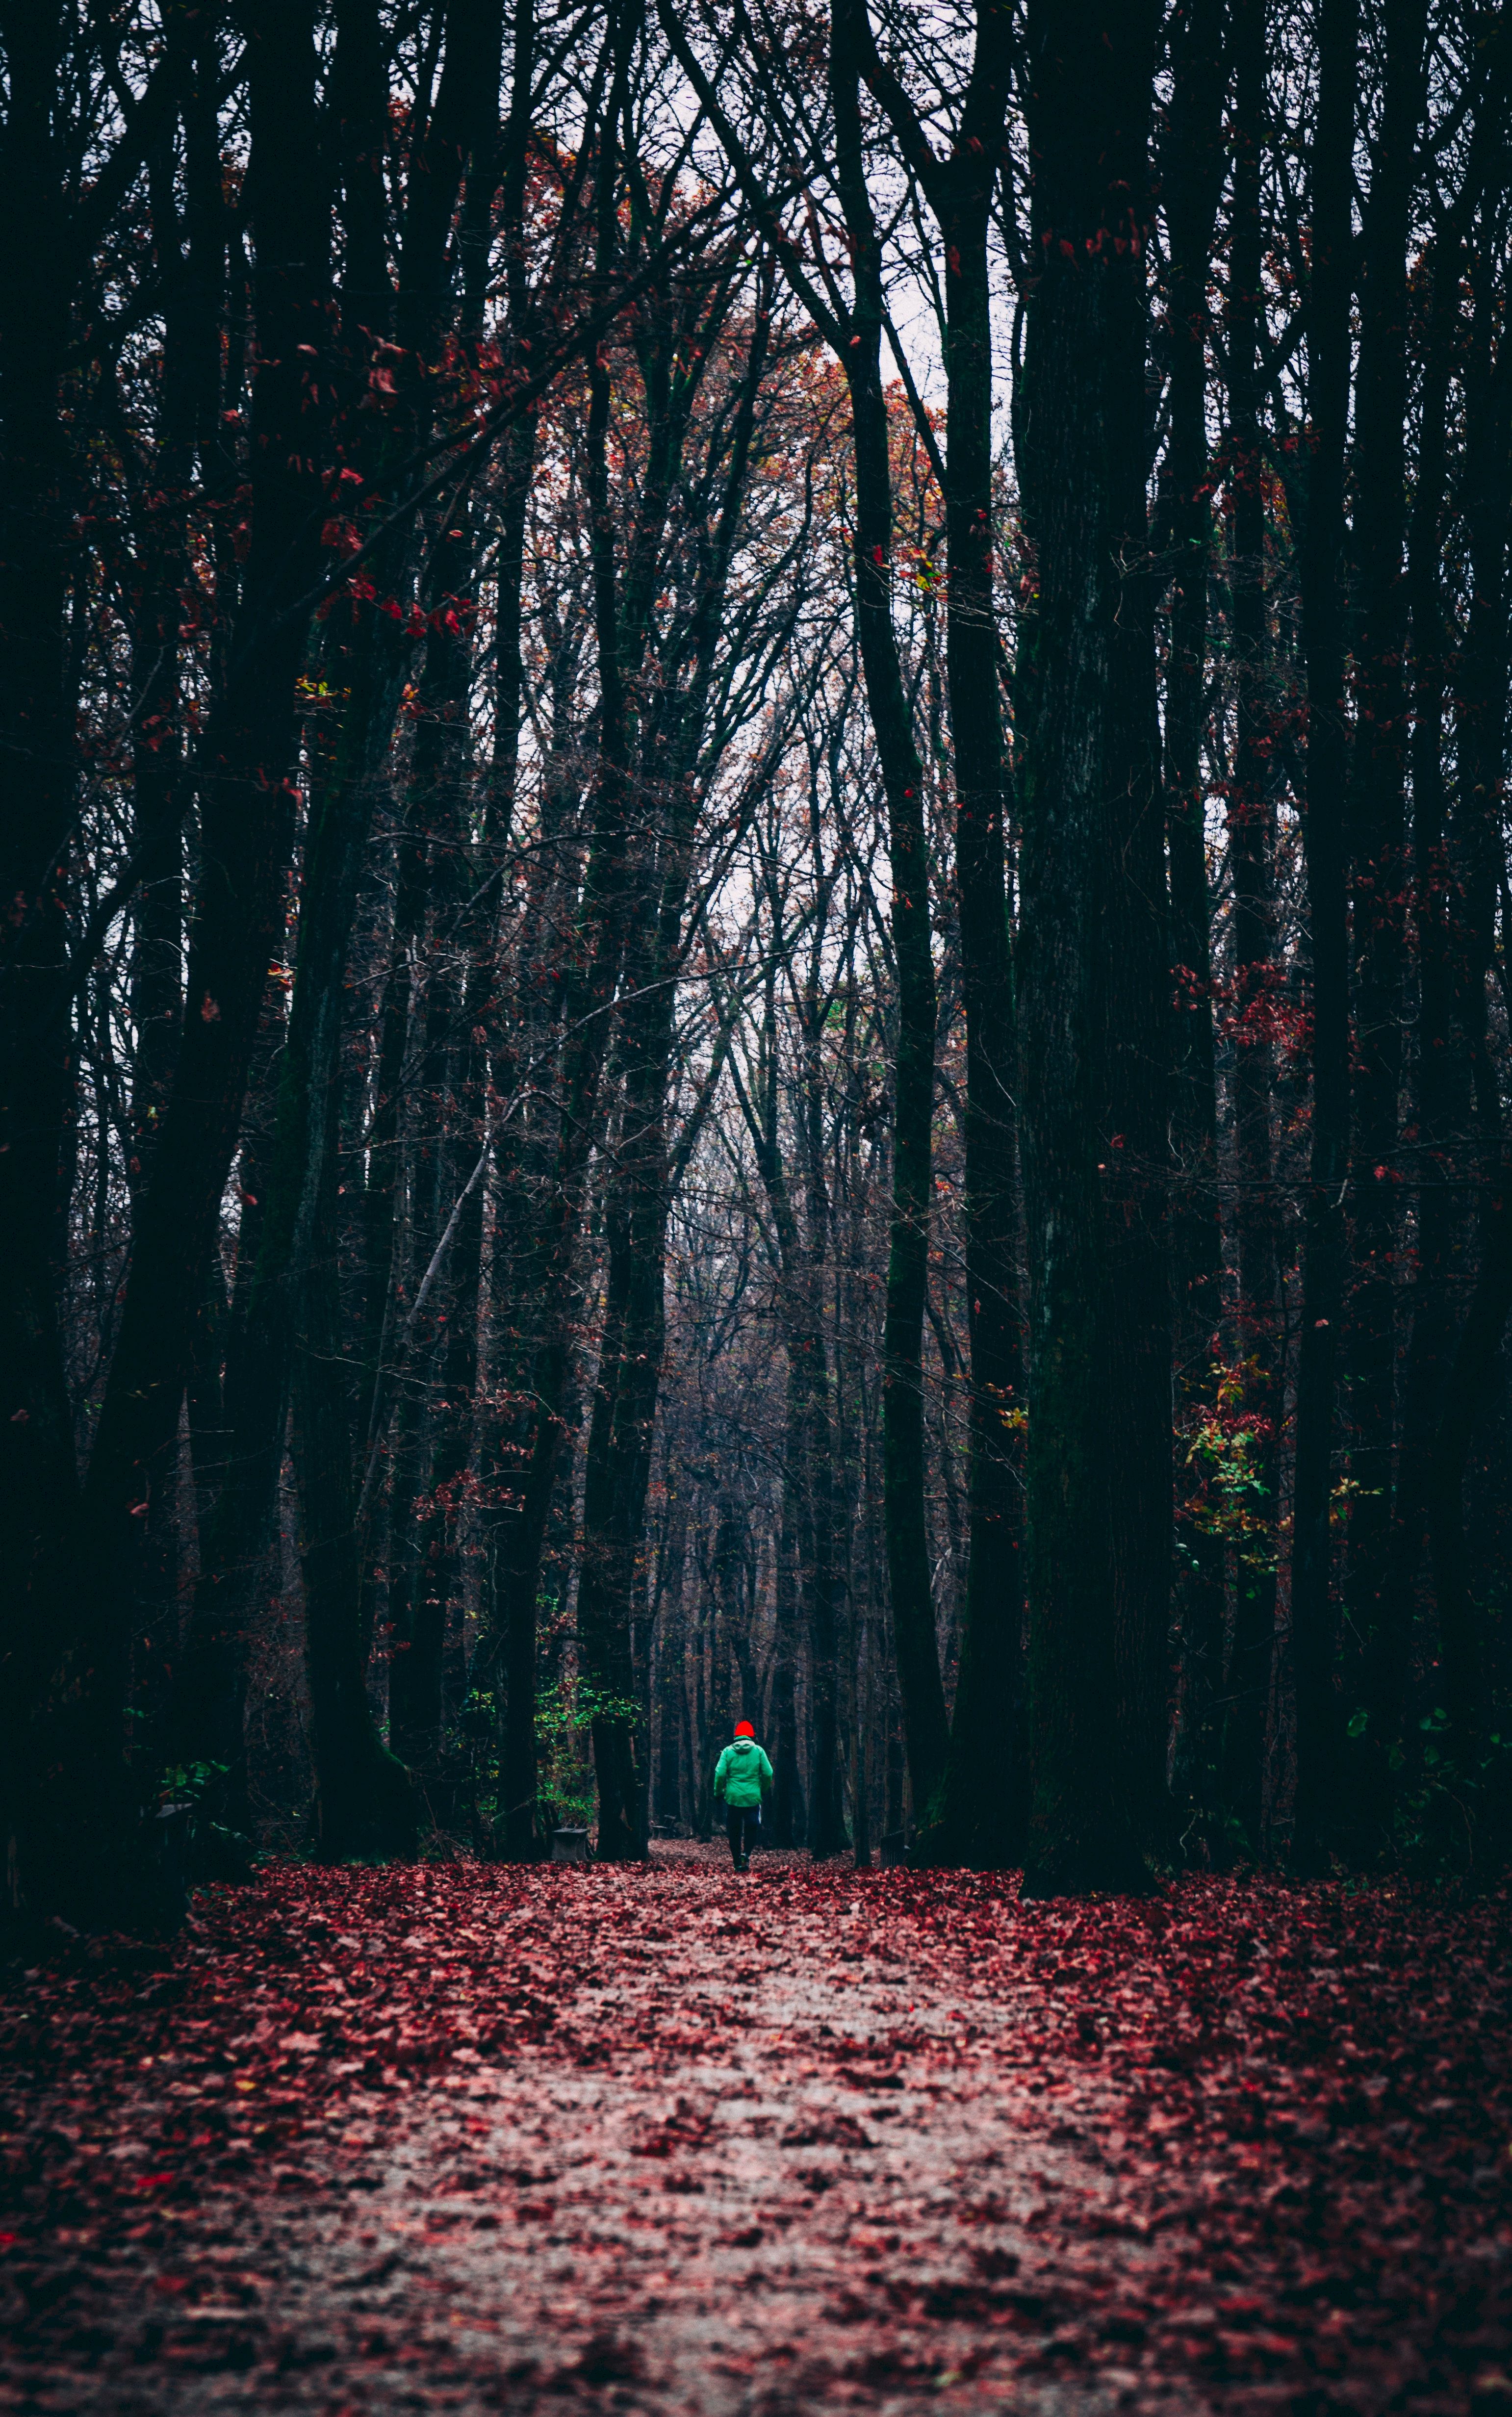 desktop Images forest, nature, autumn, foliage, human, person, alone, lonely, run, running